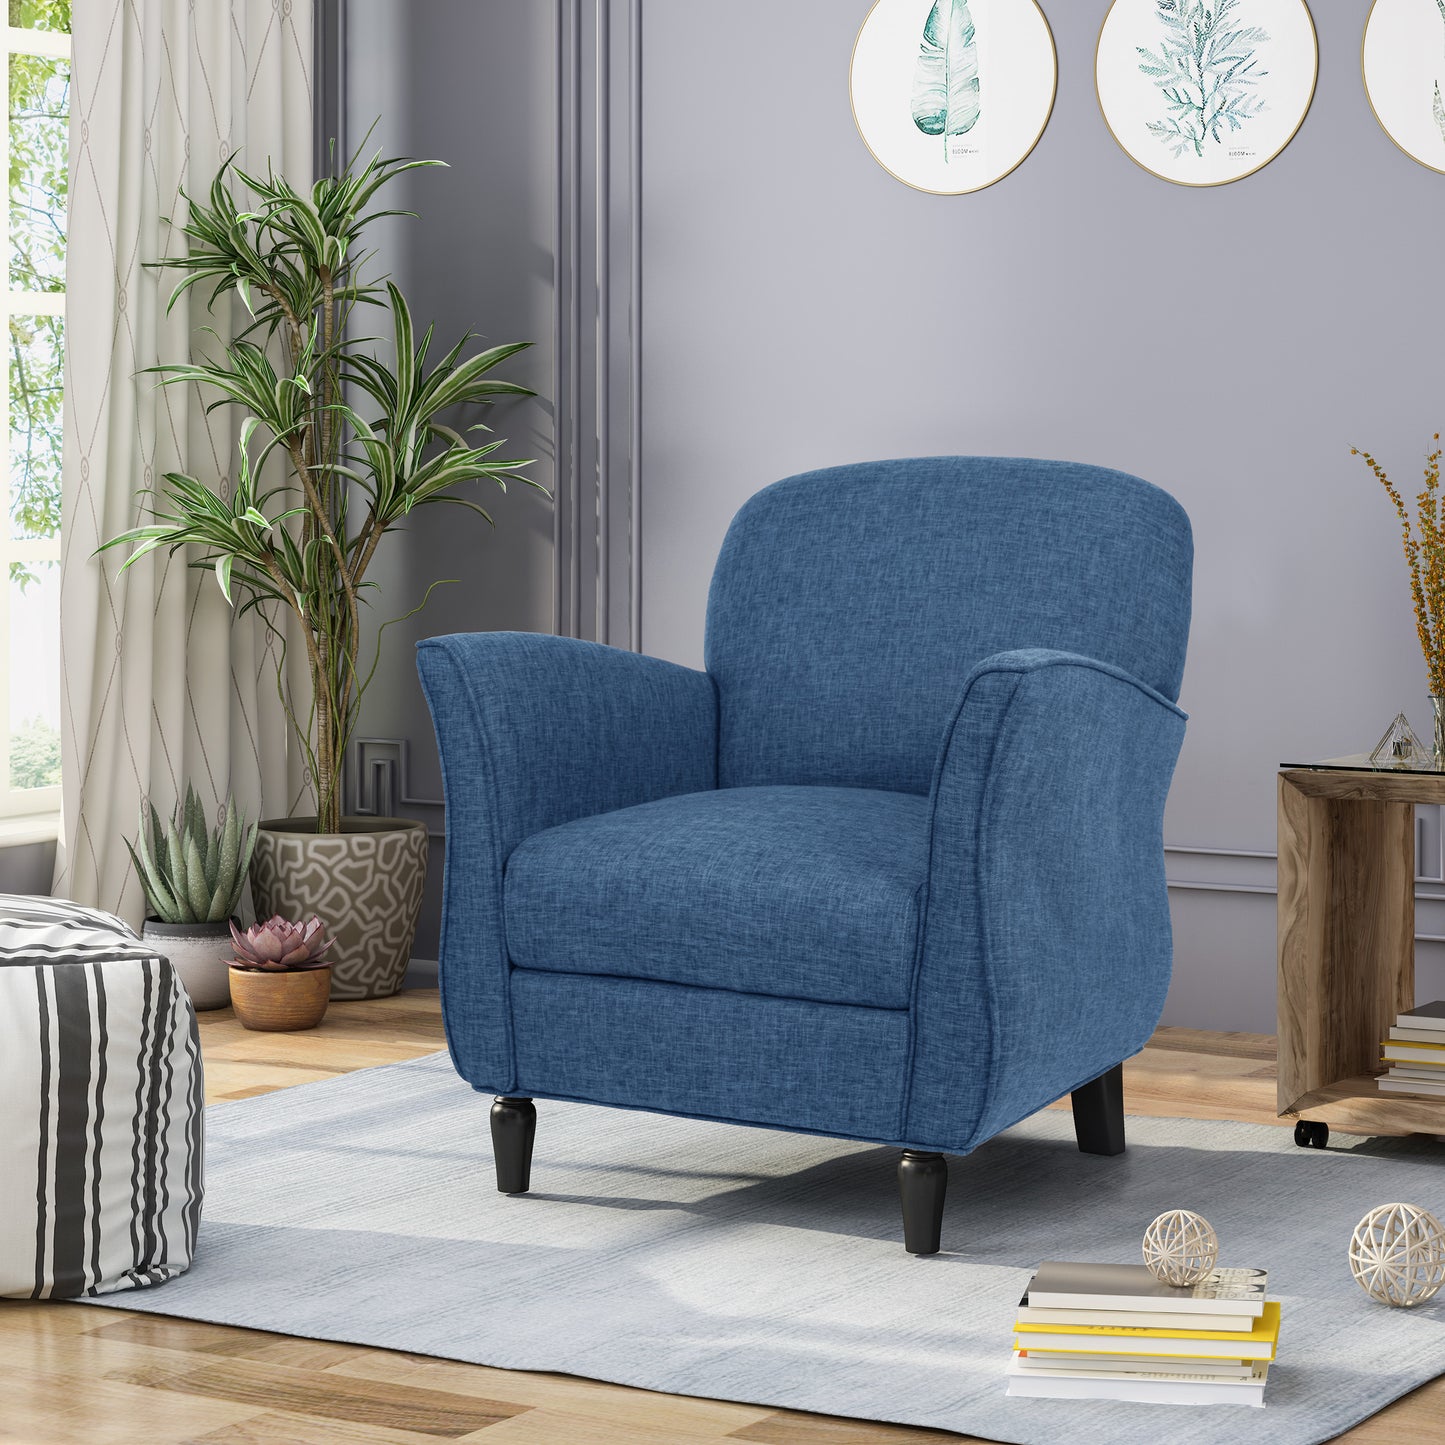 Crew Contemporary Upholstered Tweed Fabric Armchair with Piped Edges